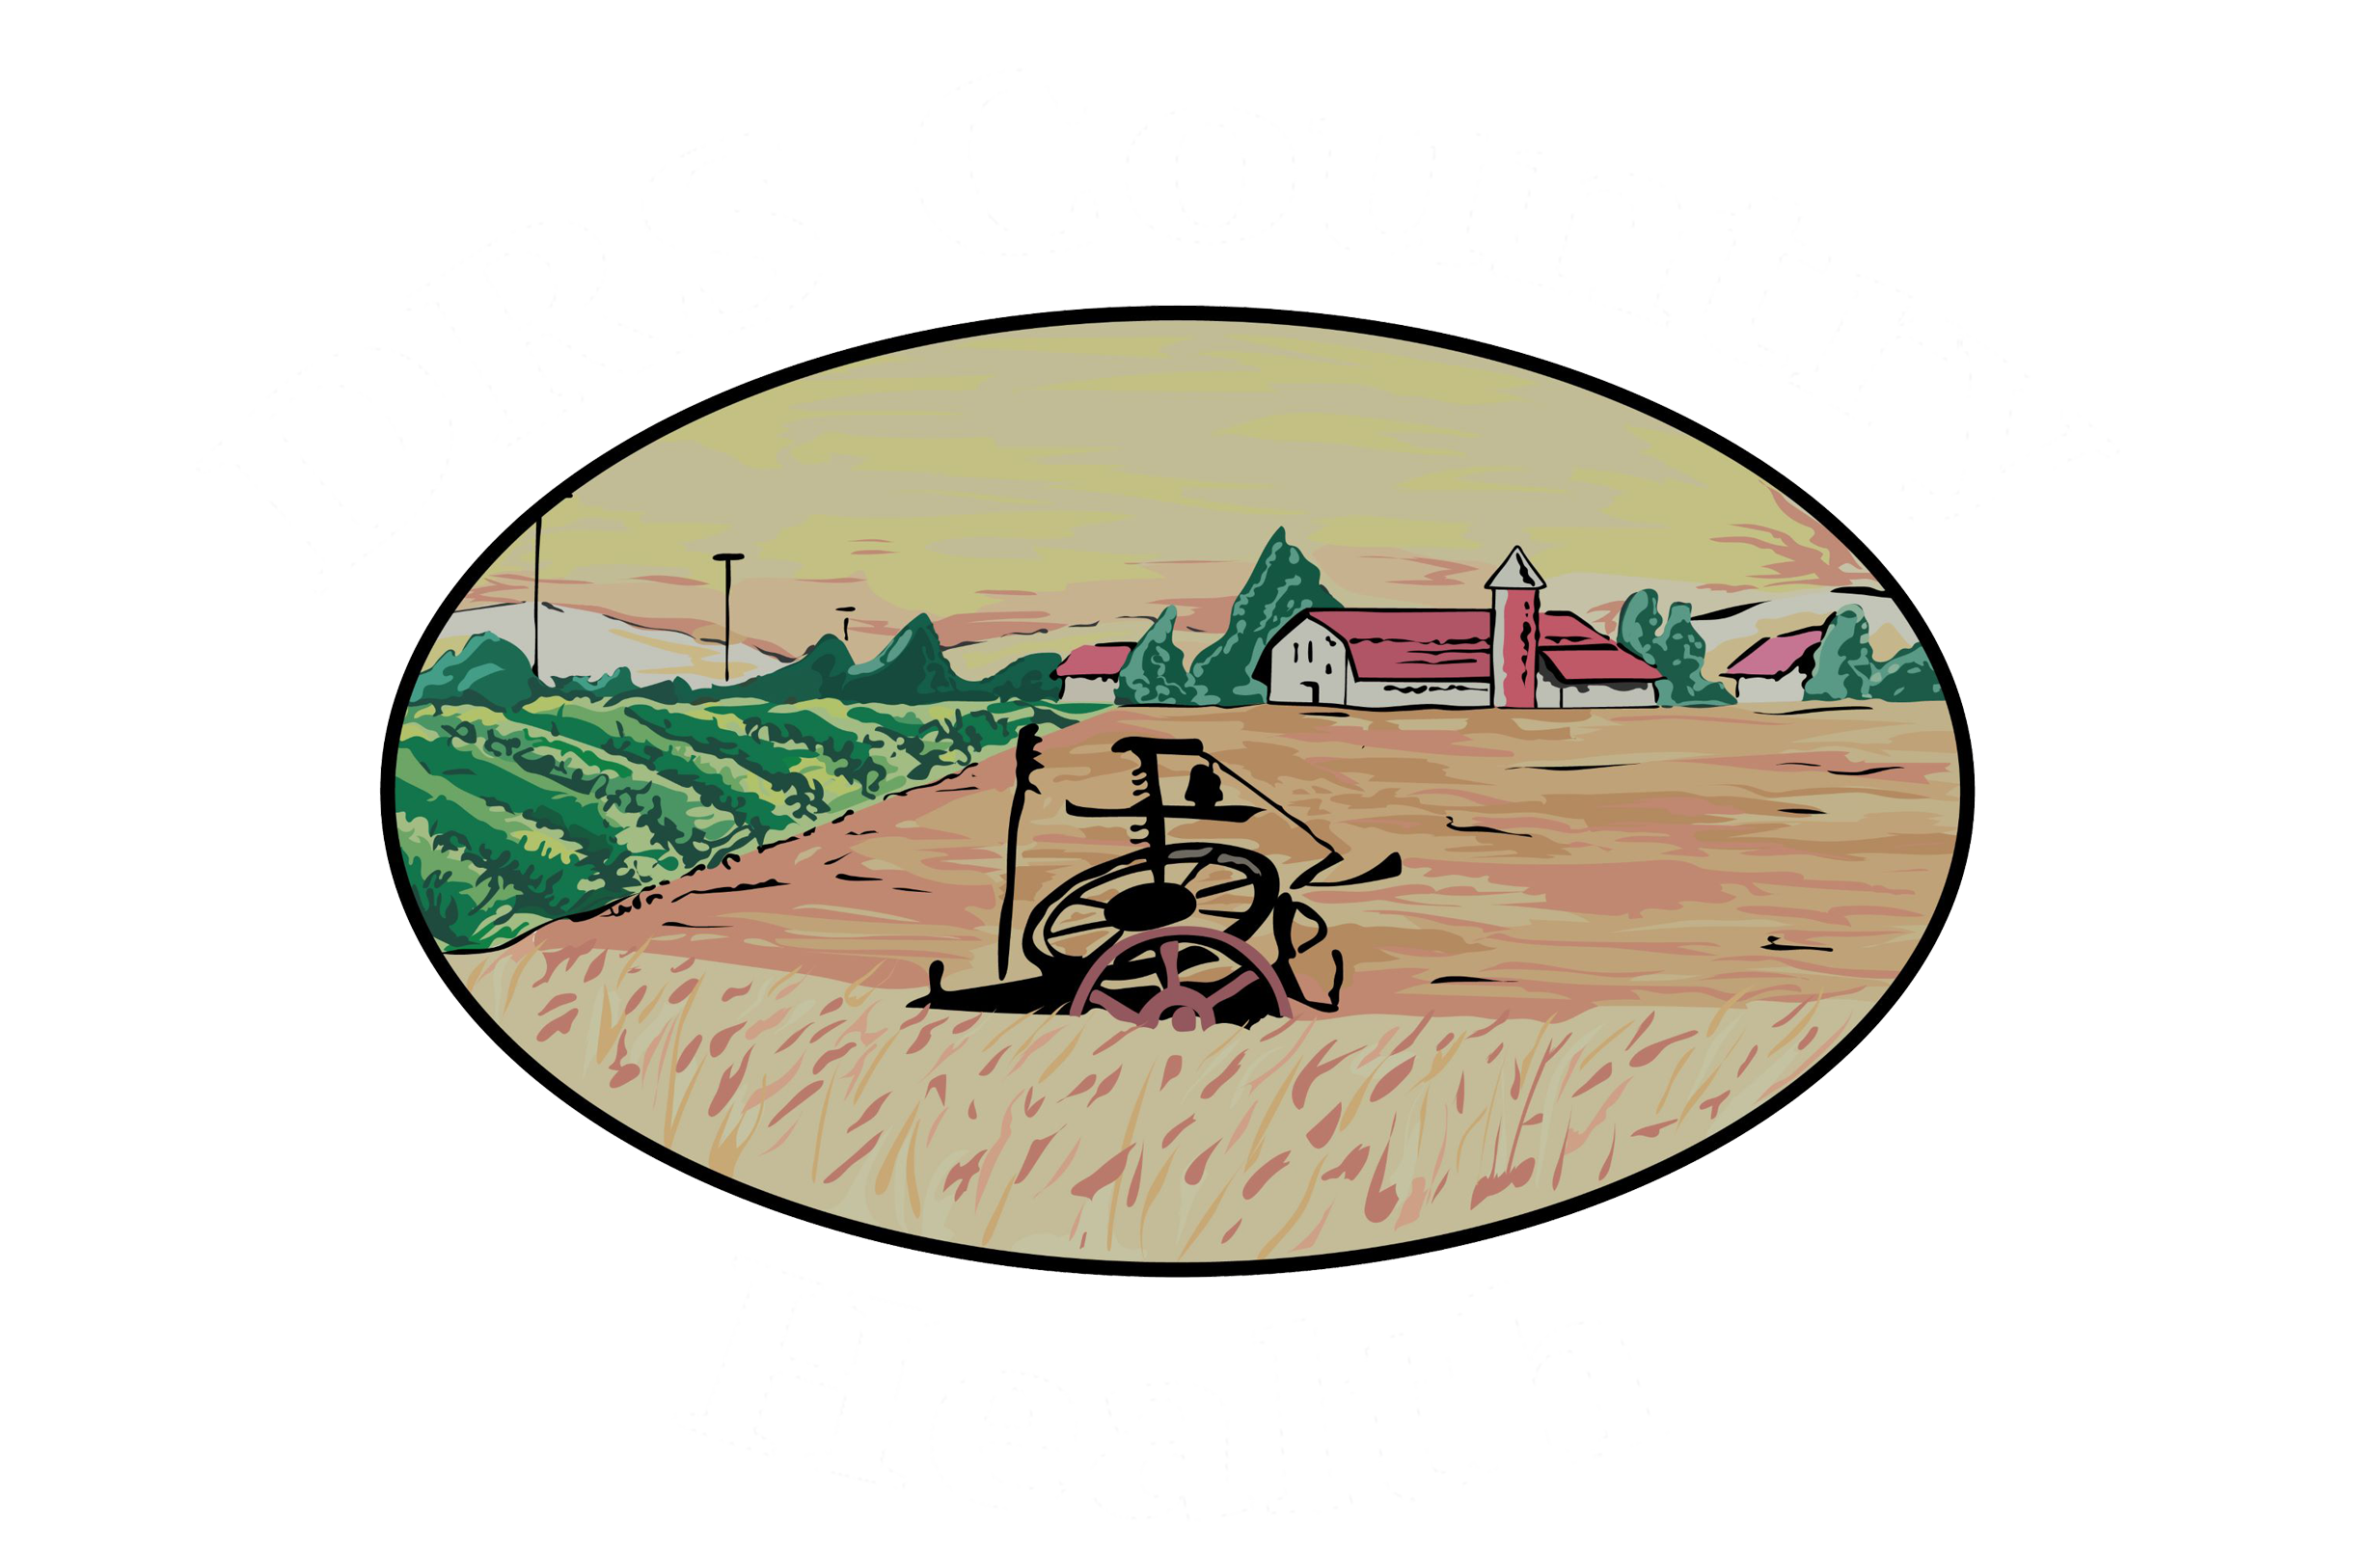 Drs Country Health